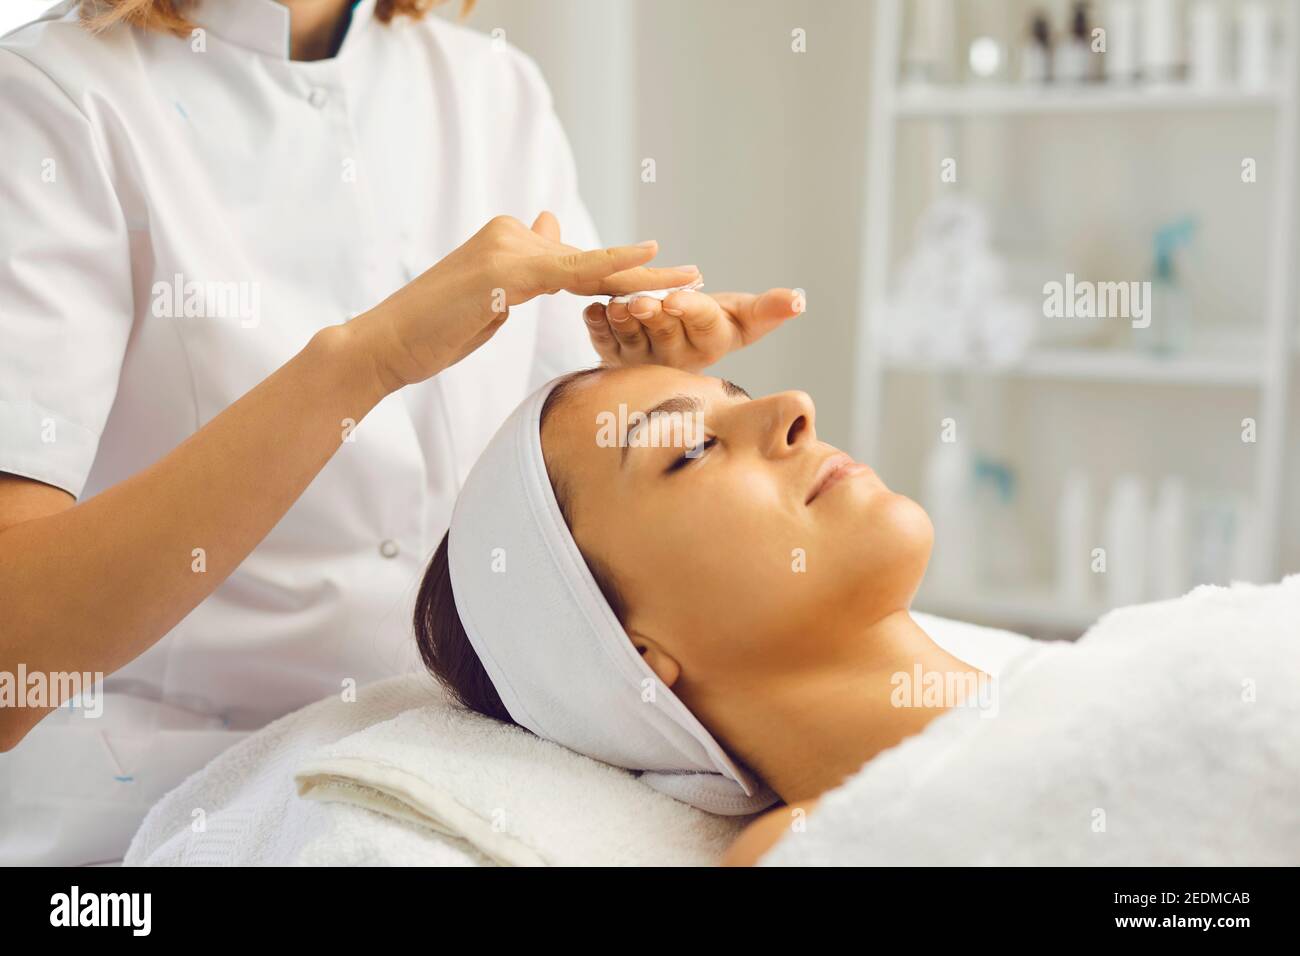 Cosmetologist rubbing cream between palms before facial massage for young woman in beauty salon Stock Photo